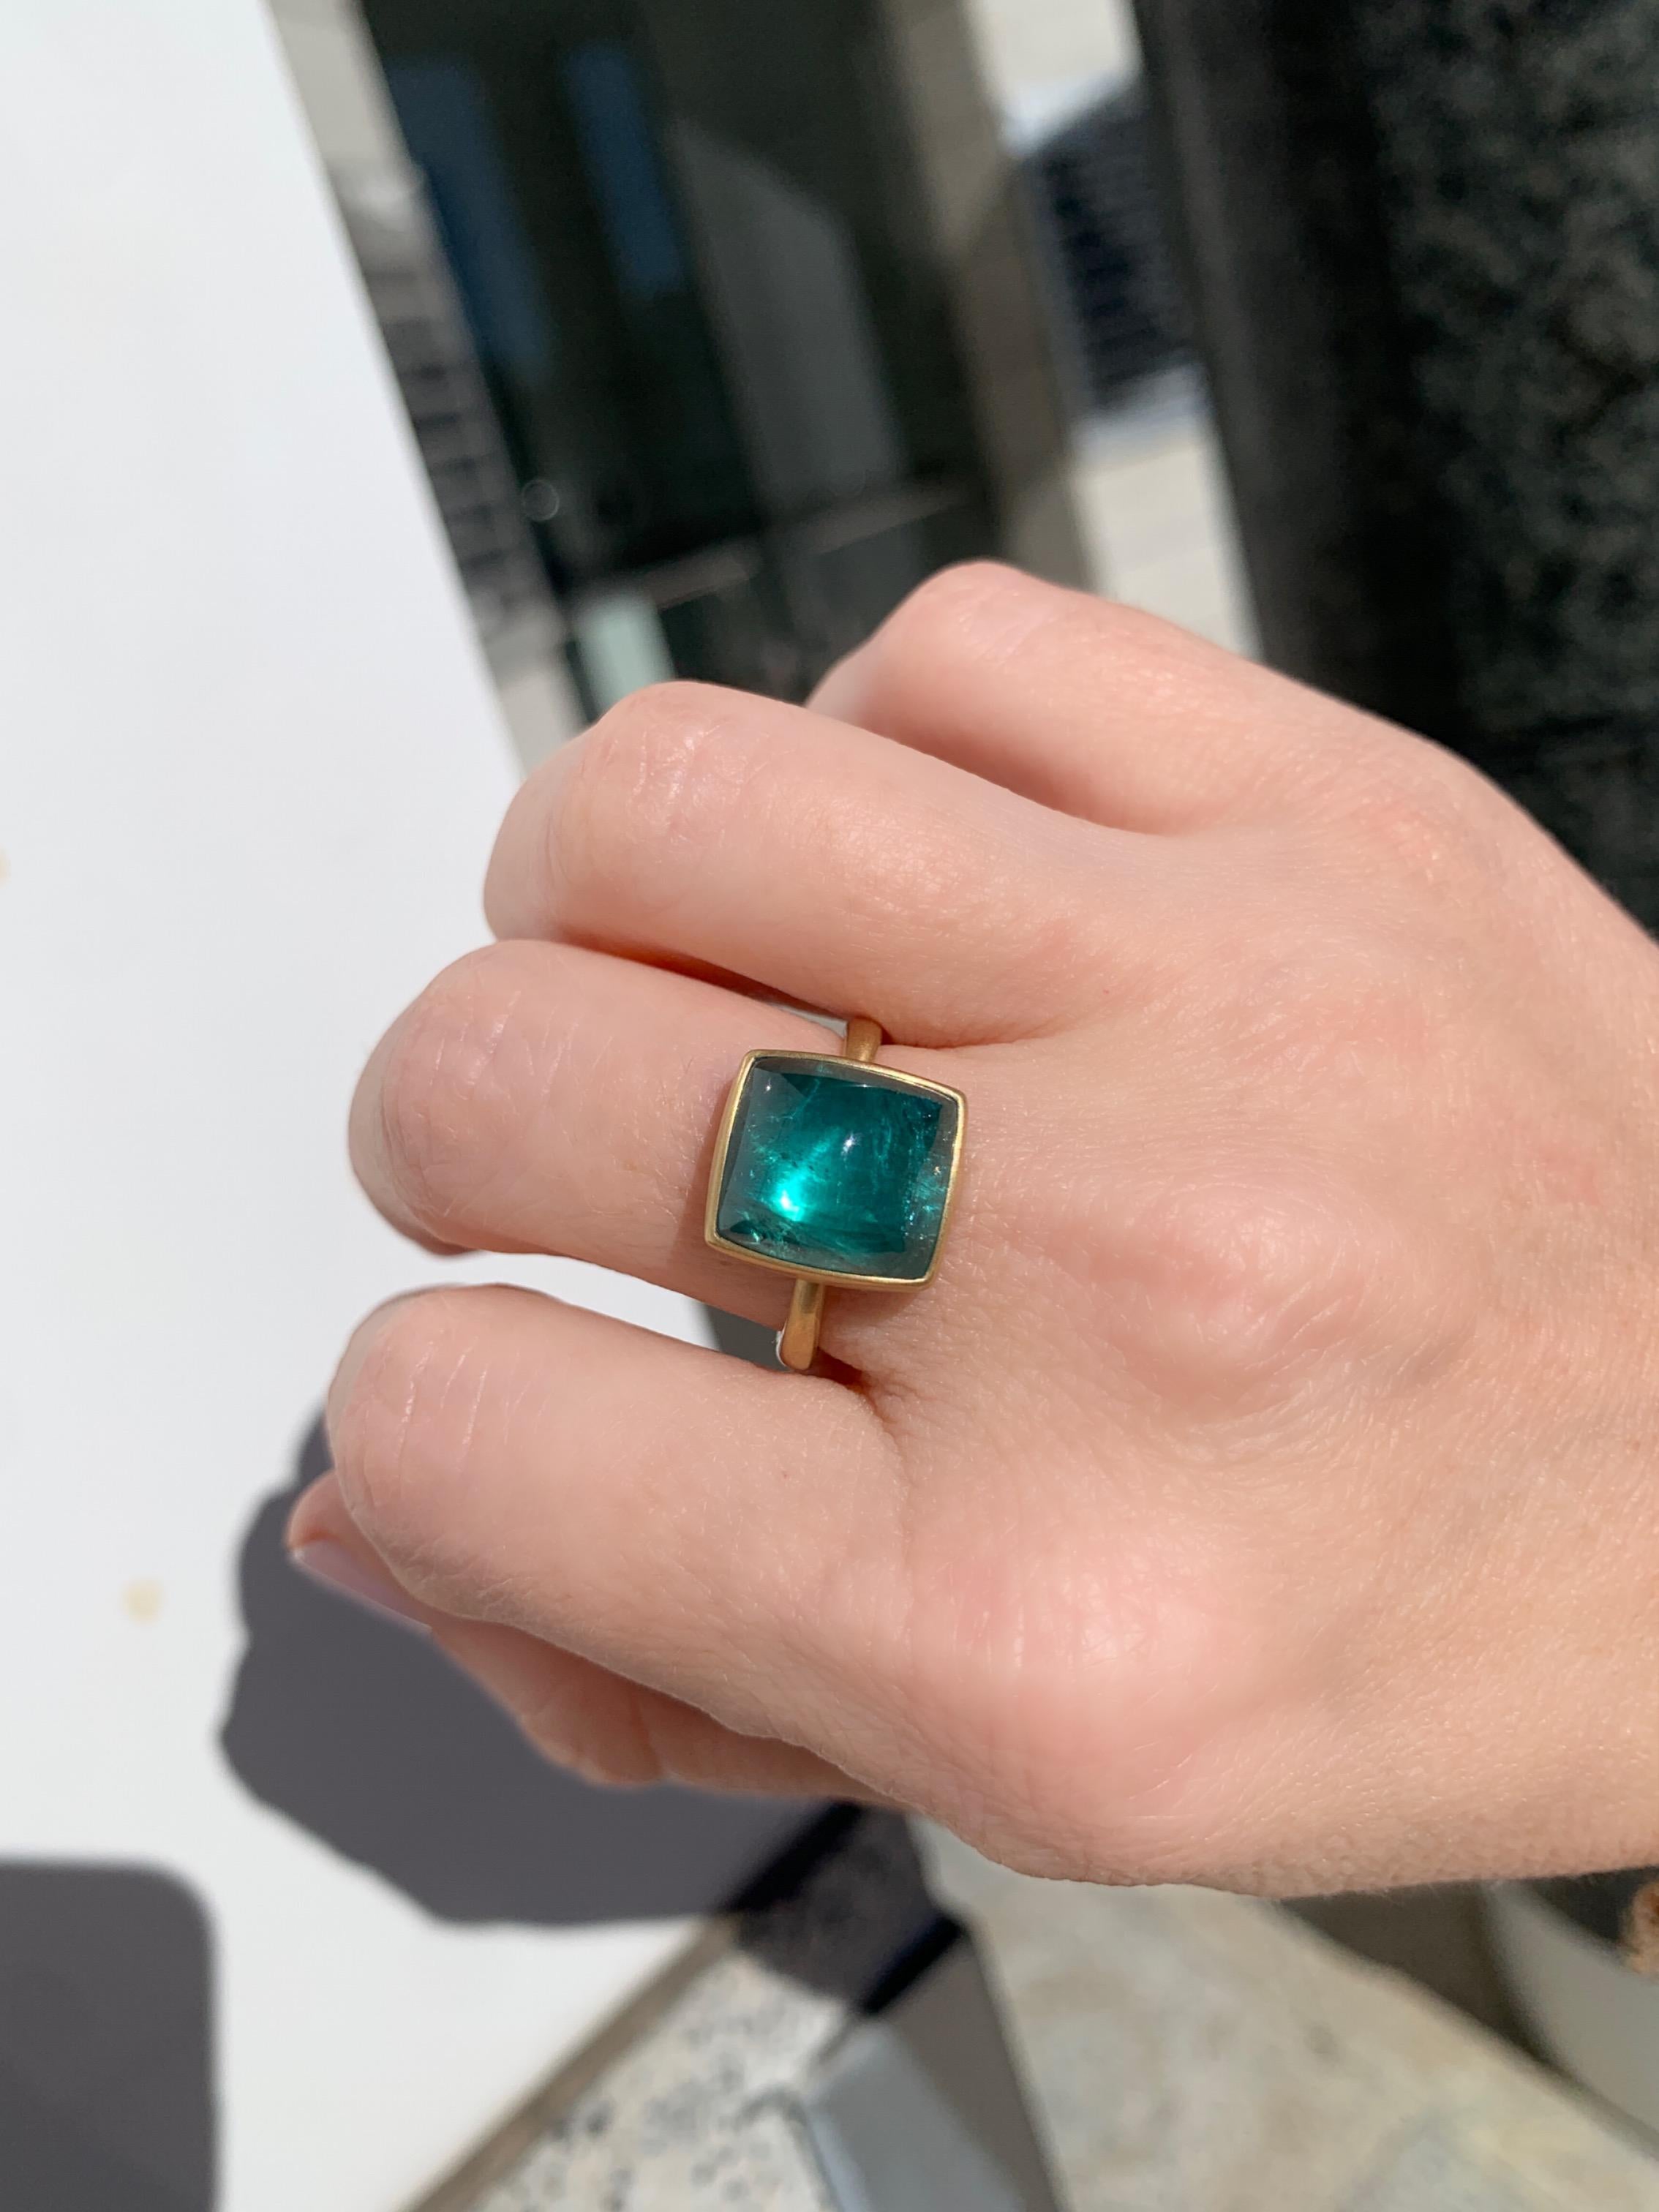 One of a kind ring hand-fabricated by acclaimed jewelry maker Lola Brooks in the artist's signature-finished 18k yellow gold featuring a magical, glowing 9.29 carat greenish-blue indicolite tourmaline cushion cabochon on a tapered 18k yellow gold